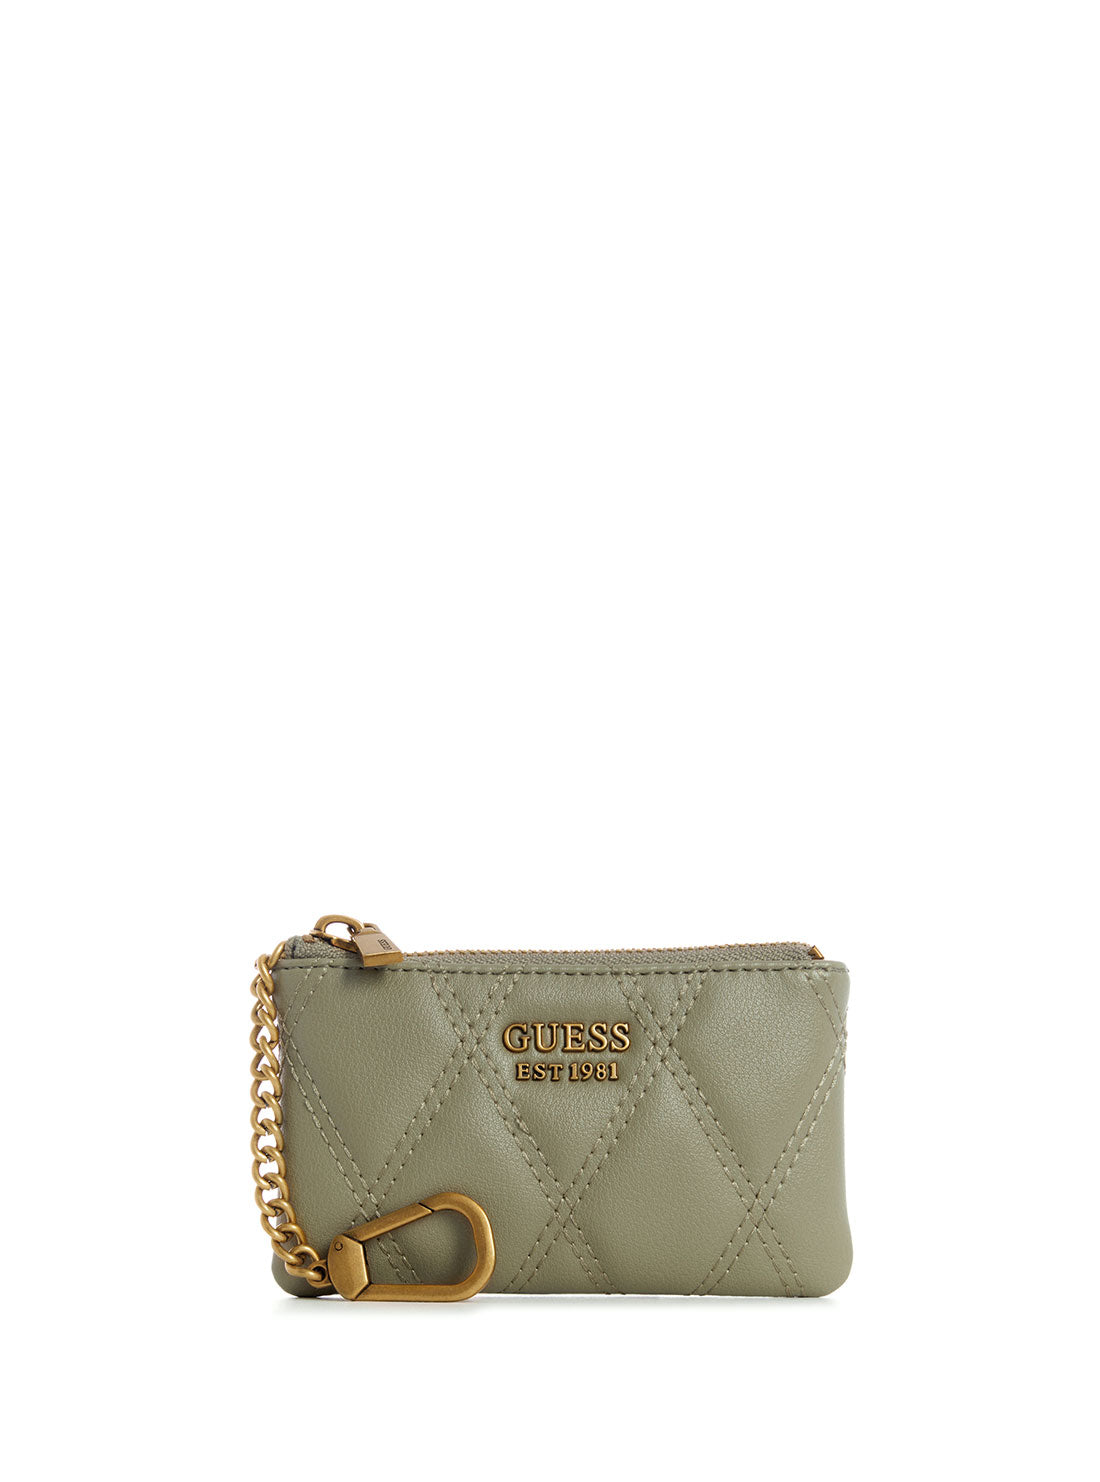 GUESS Women's Sage Triana Zip Pouch QS855334 Front View